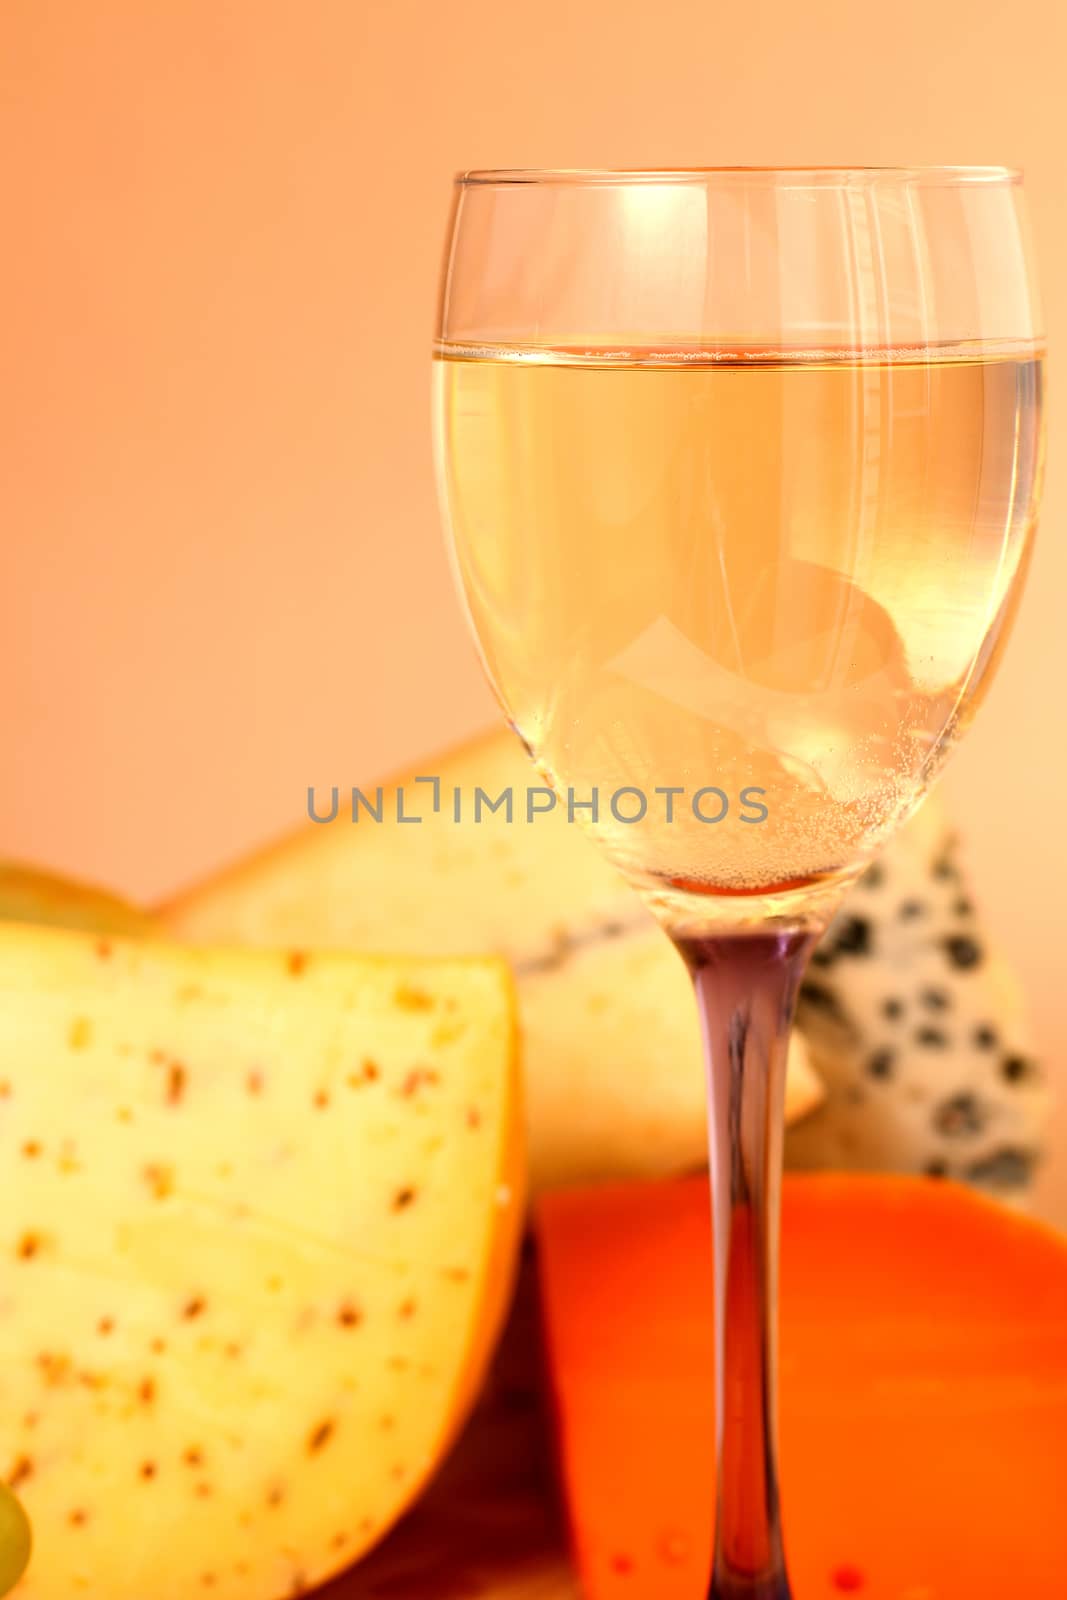 Cheese and wine by destillat